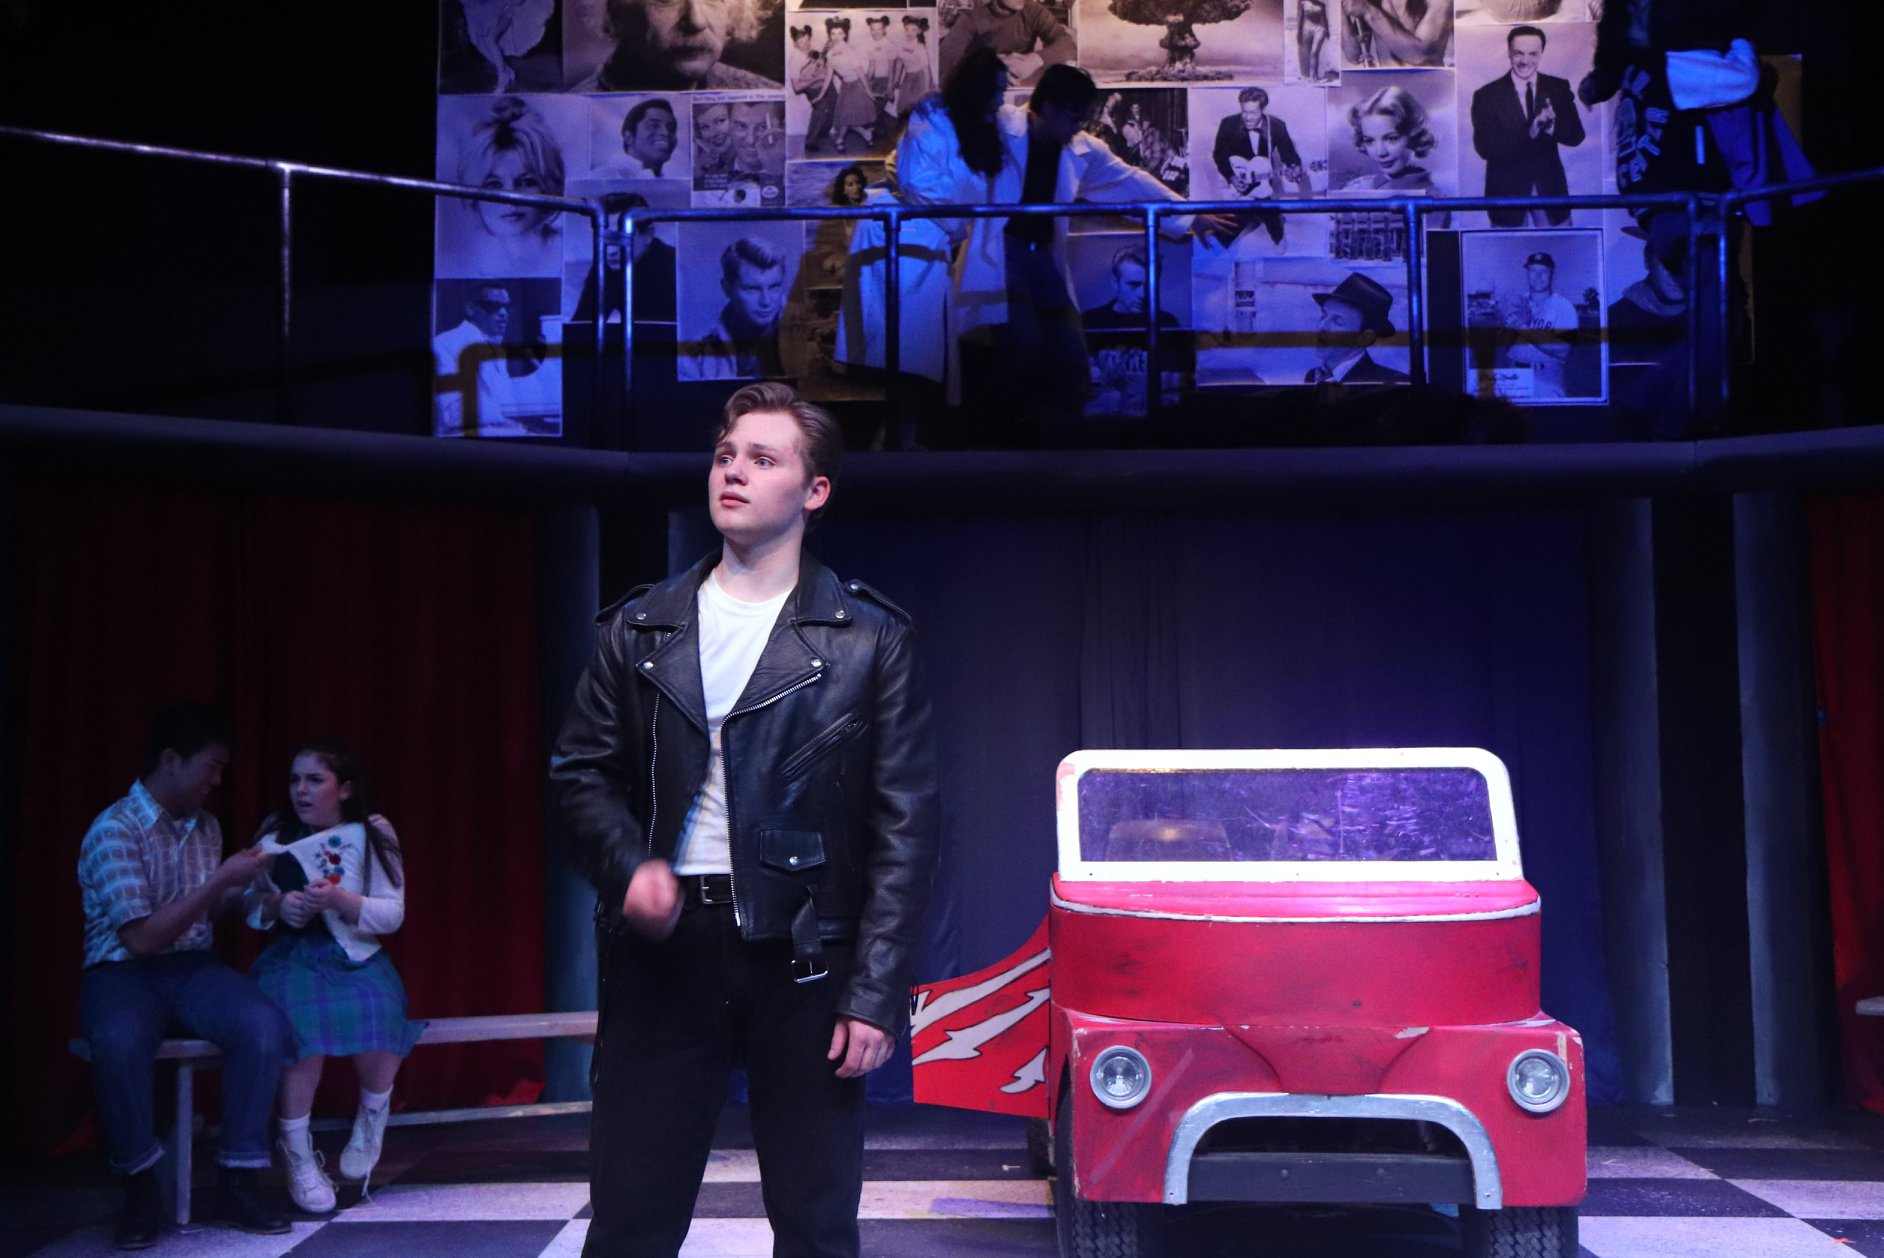 Grease (2018)